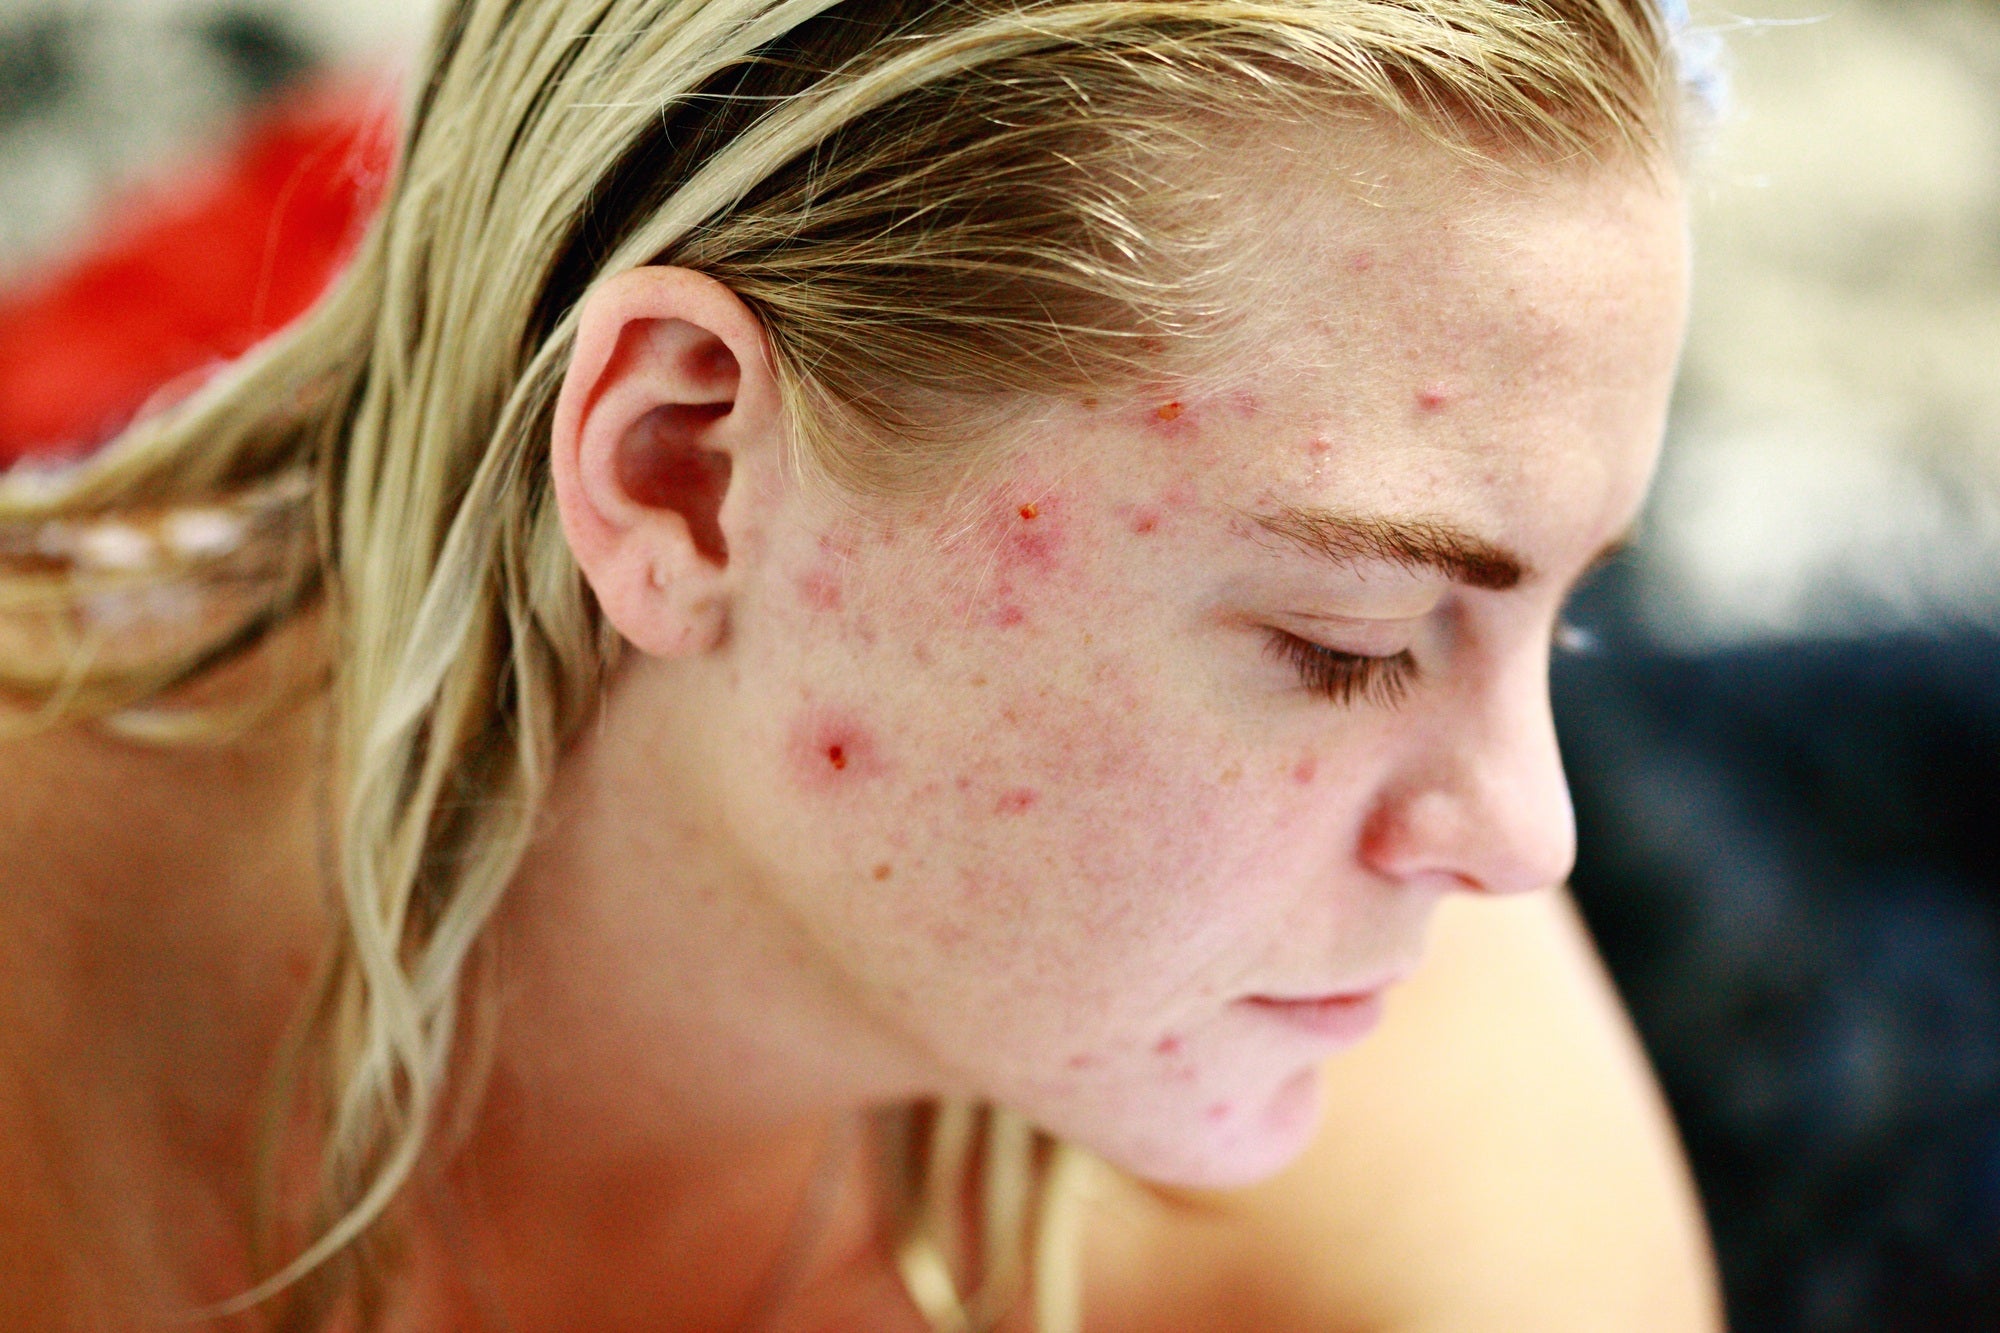 Know Your Enemy: Understanding Acne and How to Treat It